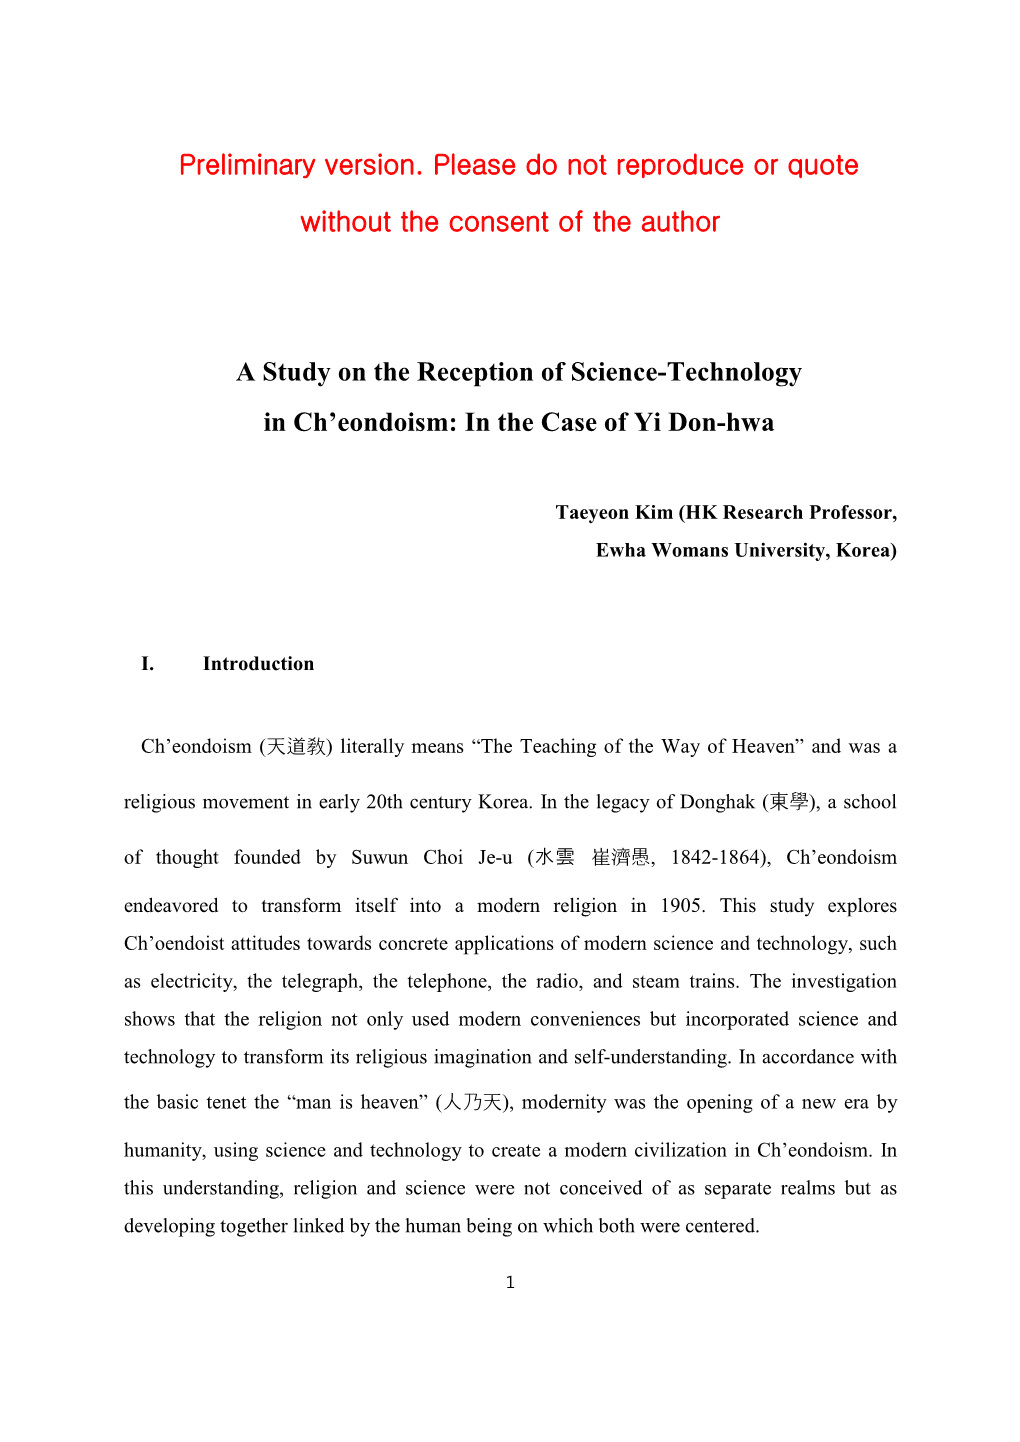 A Study on the Reception of Science-Technology in Ch’Eondoism: in the Case of Yi Don-Hwa